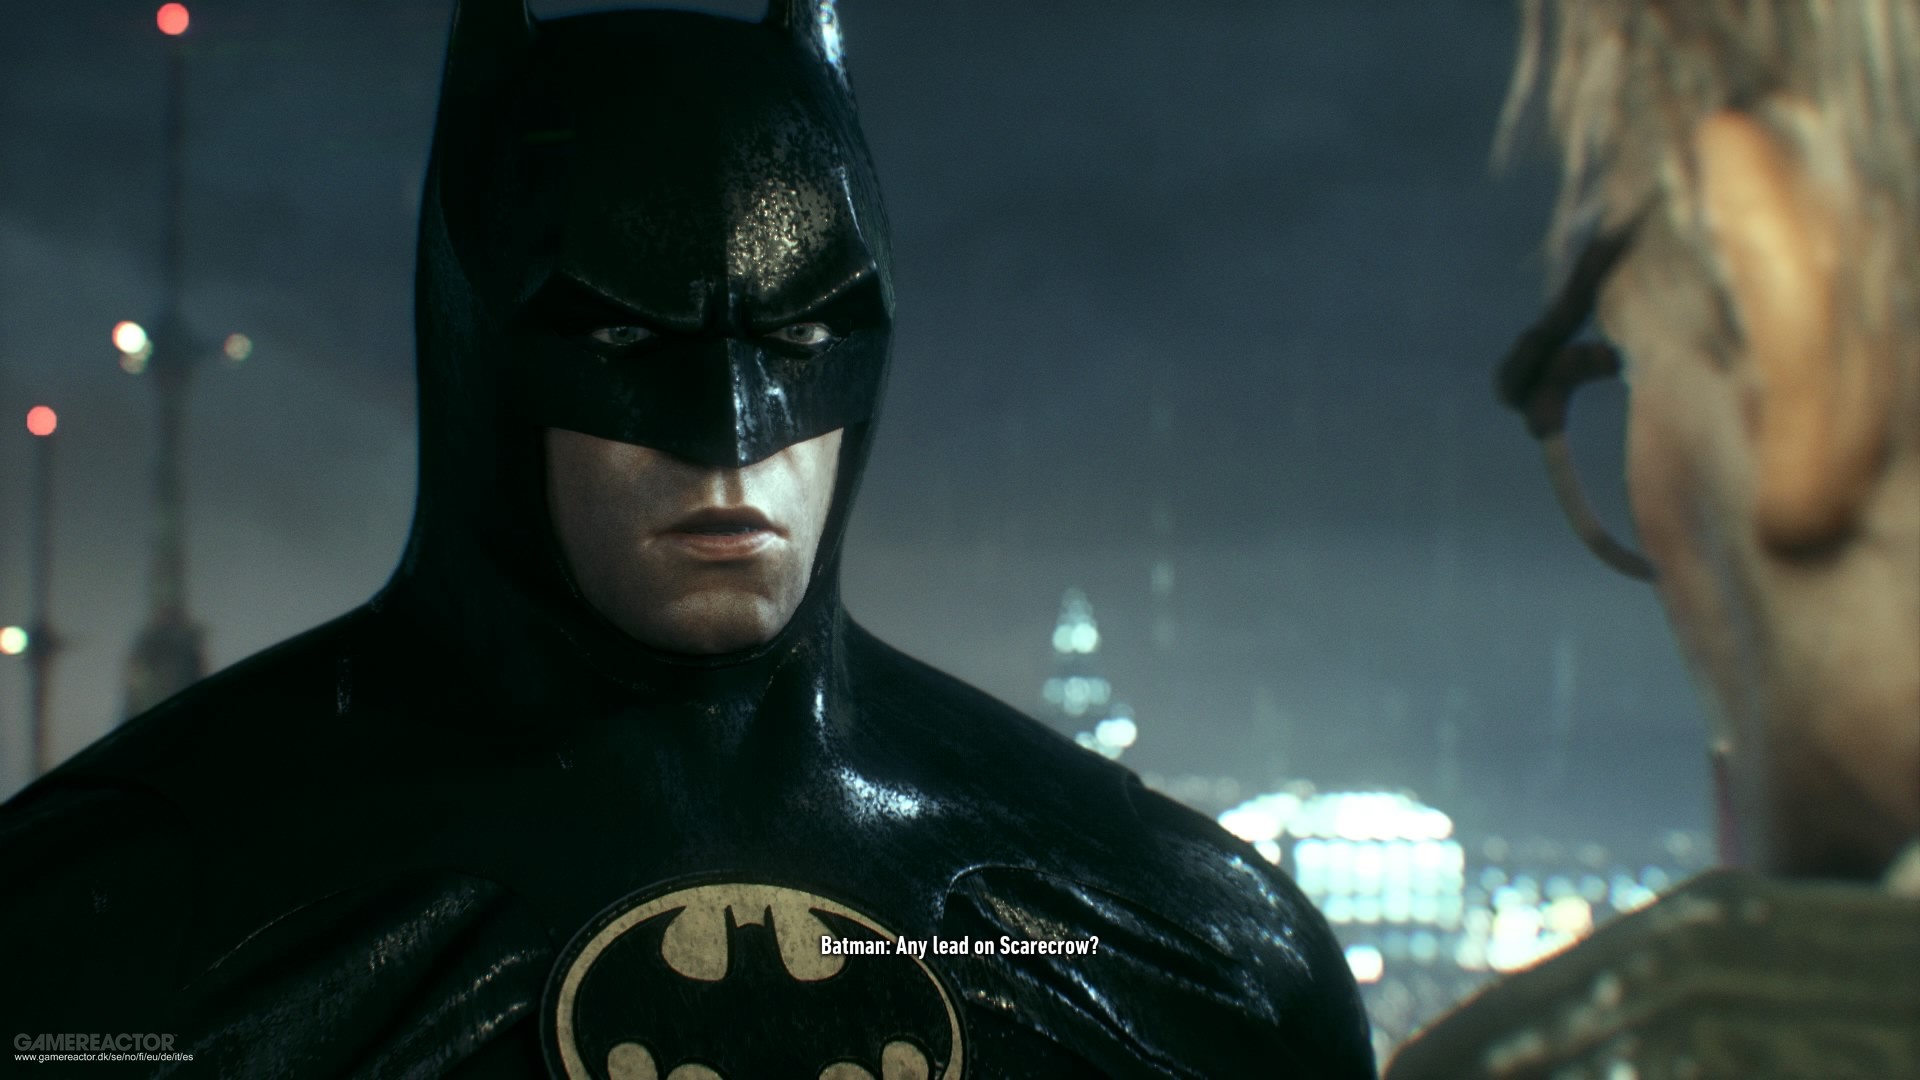 Kevin Conroy hated working on Batman: Arkham games